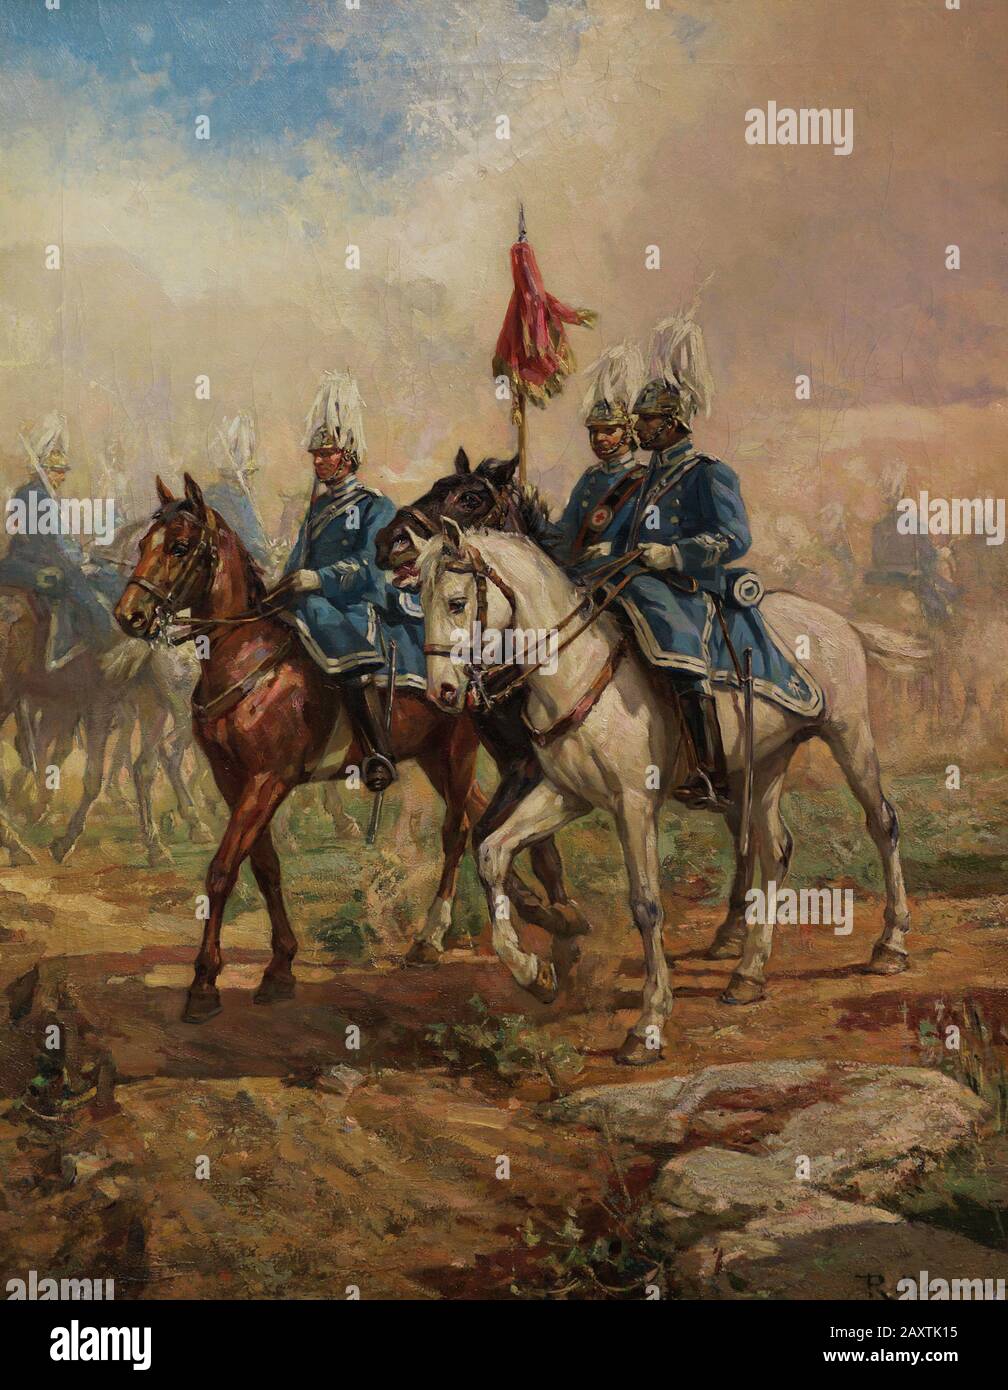 Roman Navarro (1854-1928). Spanish painter. Lancers of the Queen, 1900-1925. Museum of Fine Arts. A Coruña, Galicia, Spain. (On loan, Galician Academy of Fine Arts). Stock Photo